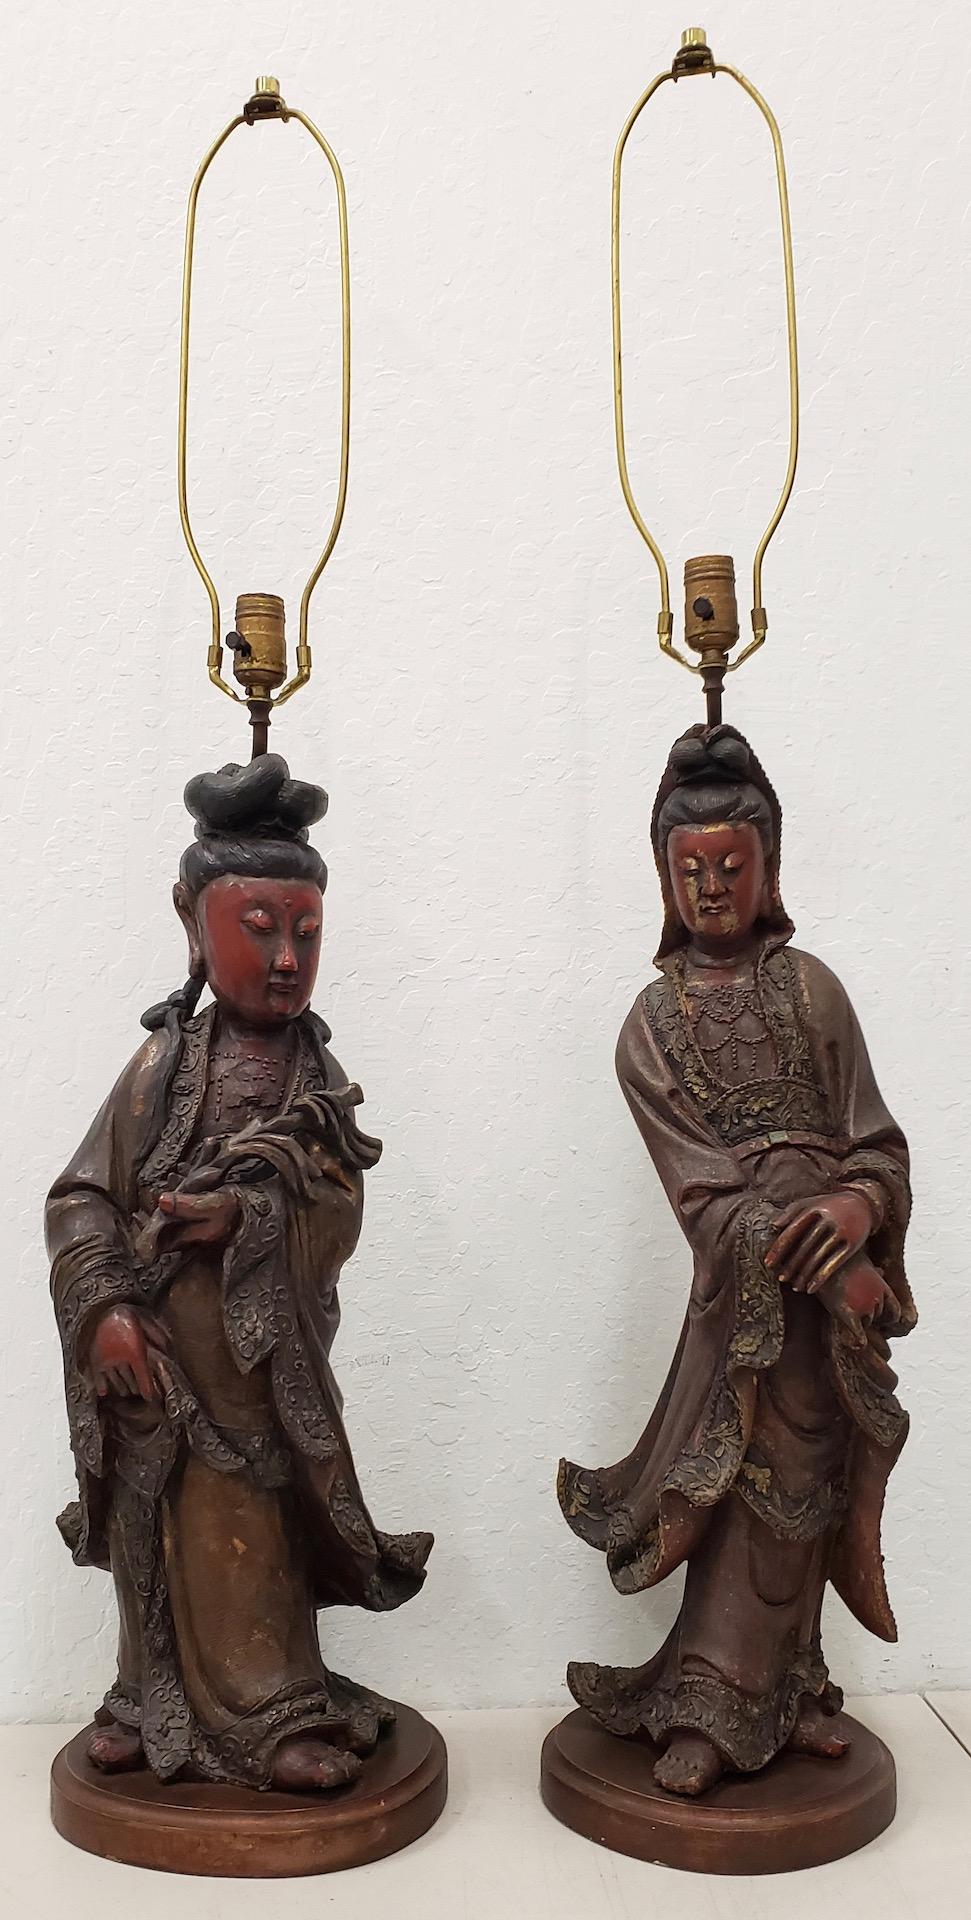 Pair of vintage Chinese carved and polychrome table lamps, circa 1930s

Fantastic pair of vintage table lamps. Carved wood with ample remains of original paint.

The lamps have areas of distress, but they show beautifully and the condition adds